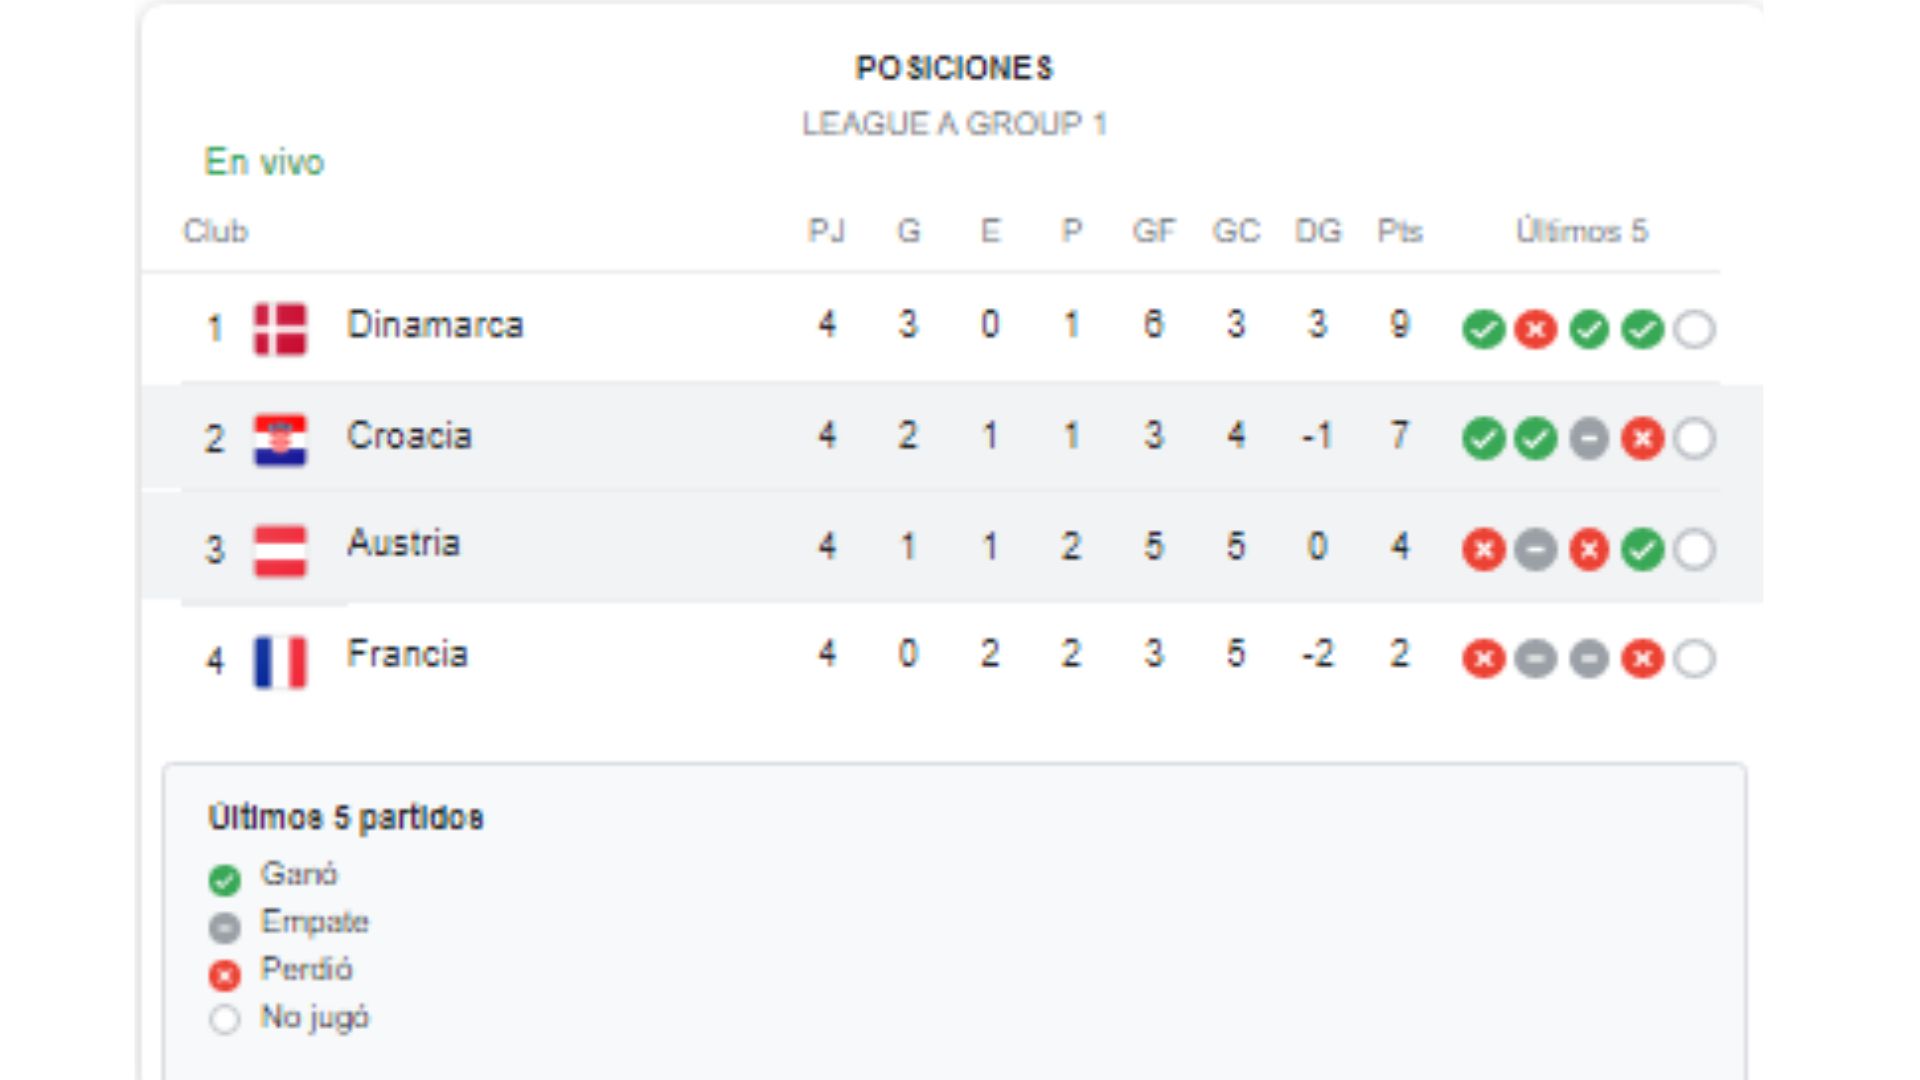 Table of Nations League Group A positions.